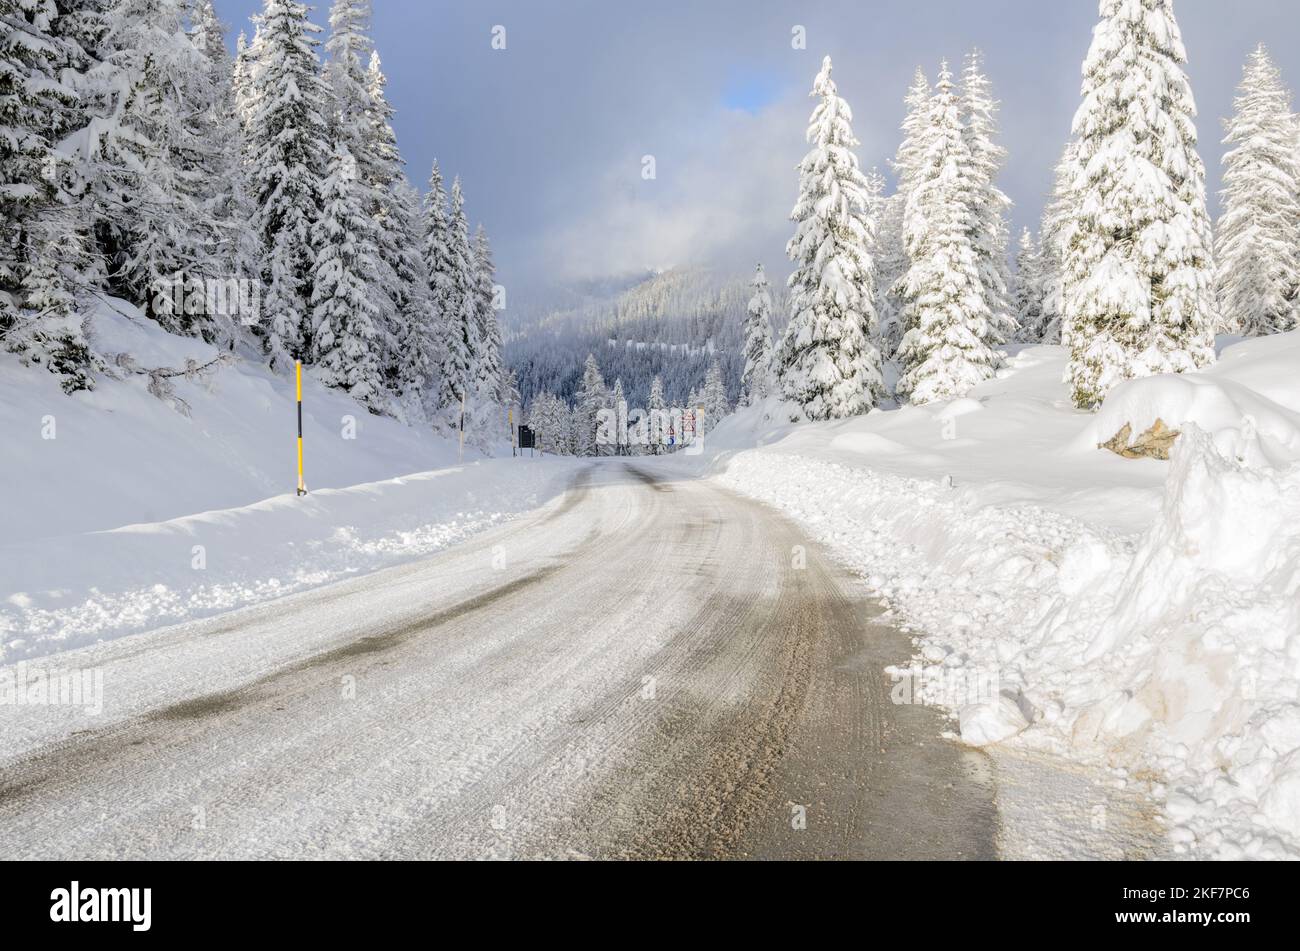 Mountain pass road through a snowy forest in winter Stock Photo